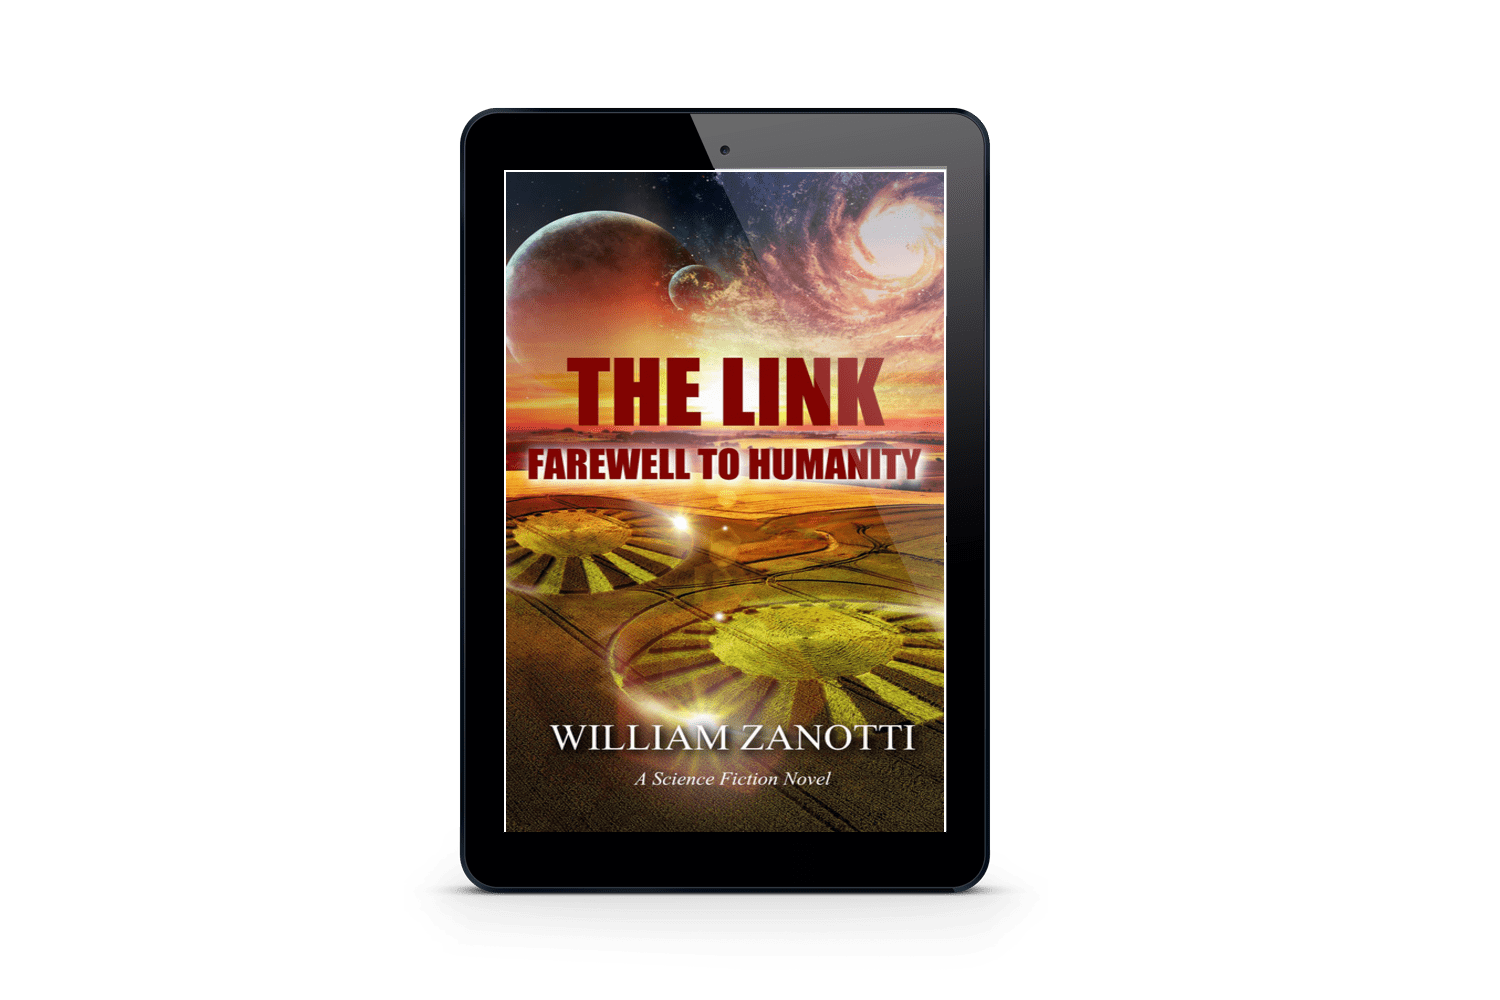 The Link: Farewell to Humanity cover andlink to sales page.